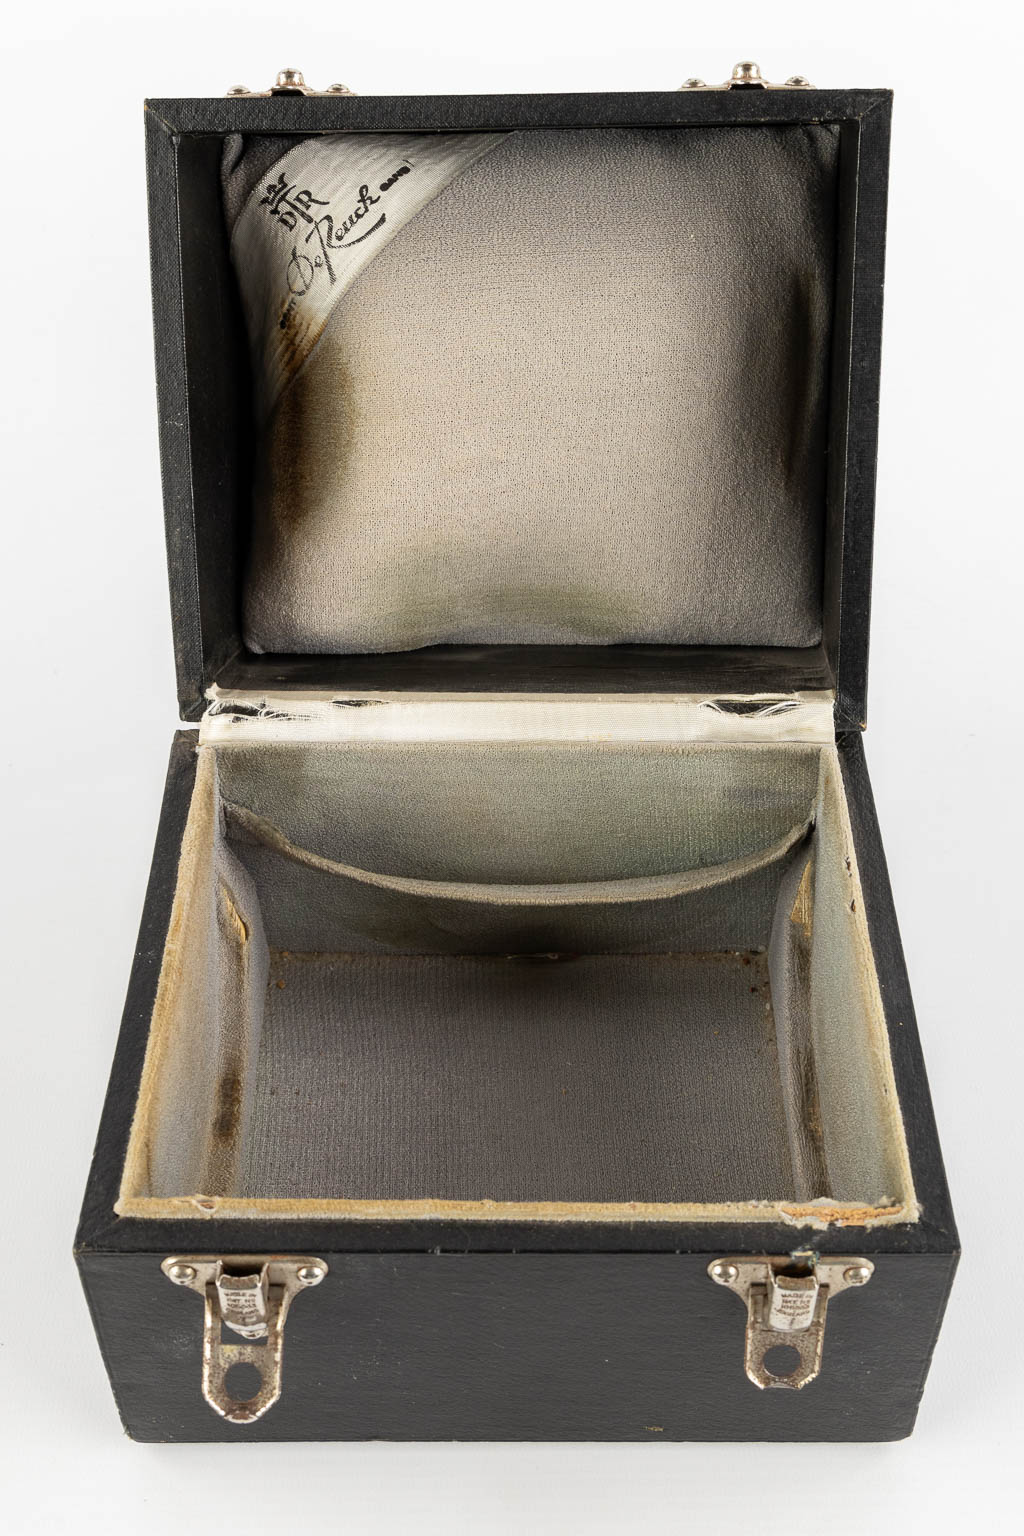 De Reuck, Ghent, a silver chalice and box. 900/1000. 658g. 1949. (H:17 x D:13,5 cm) - Image 16 of 16